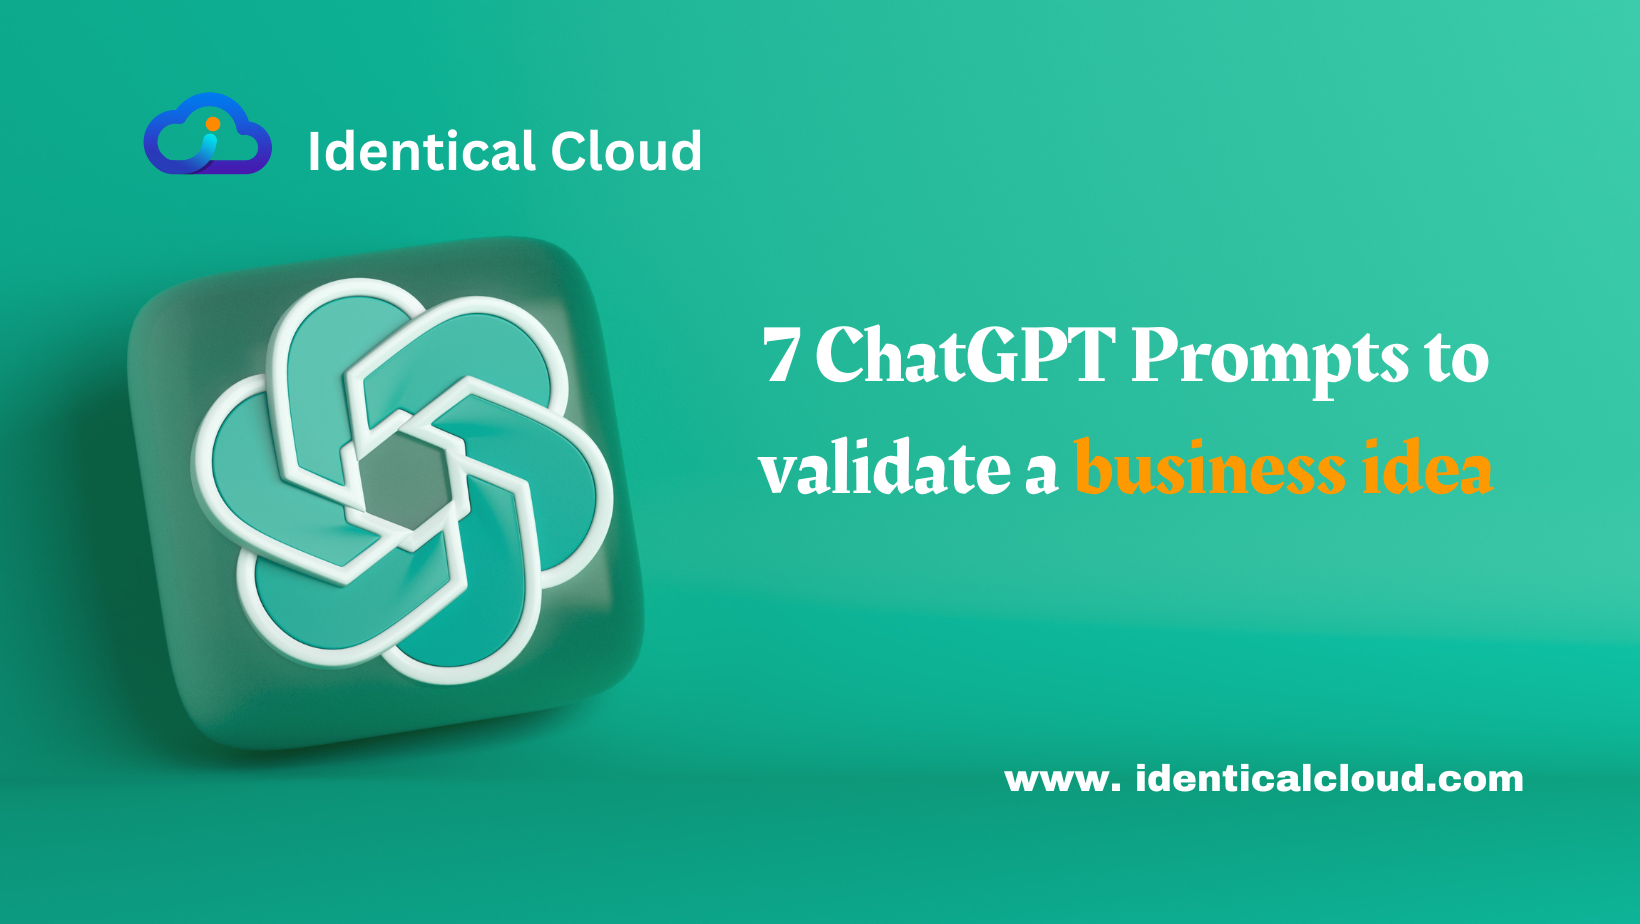 7 ChatGPT Prompts to validate a business idea - identicalcloud.com